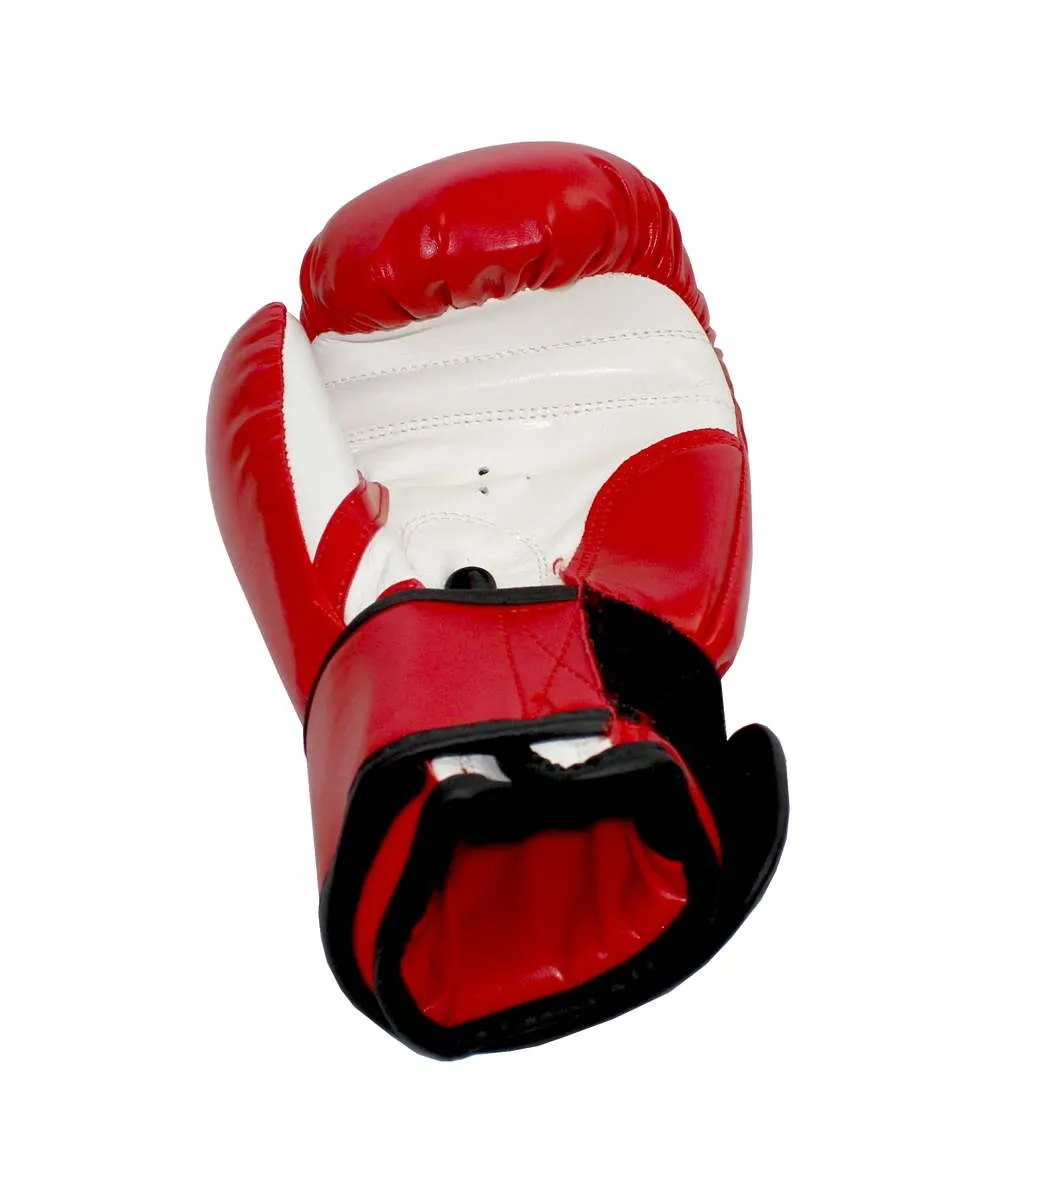 Sparring boxing gloves red white